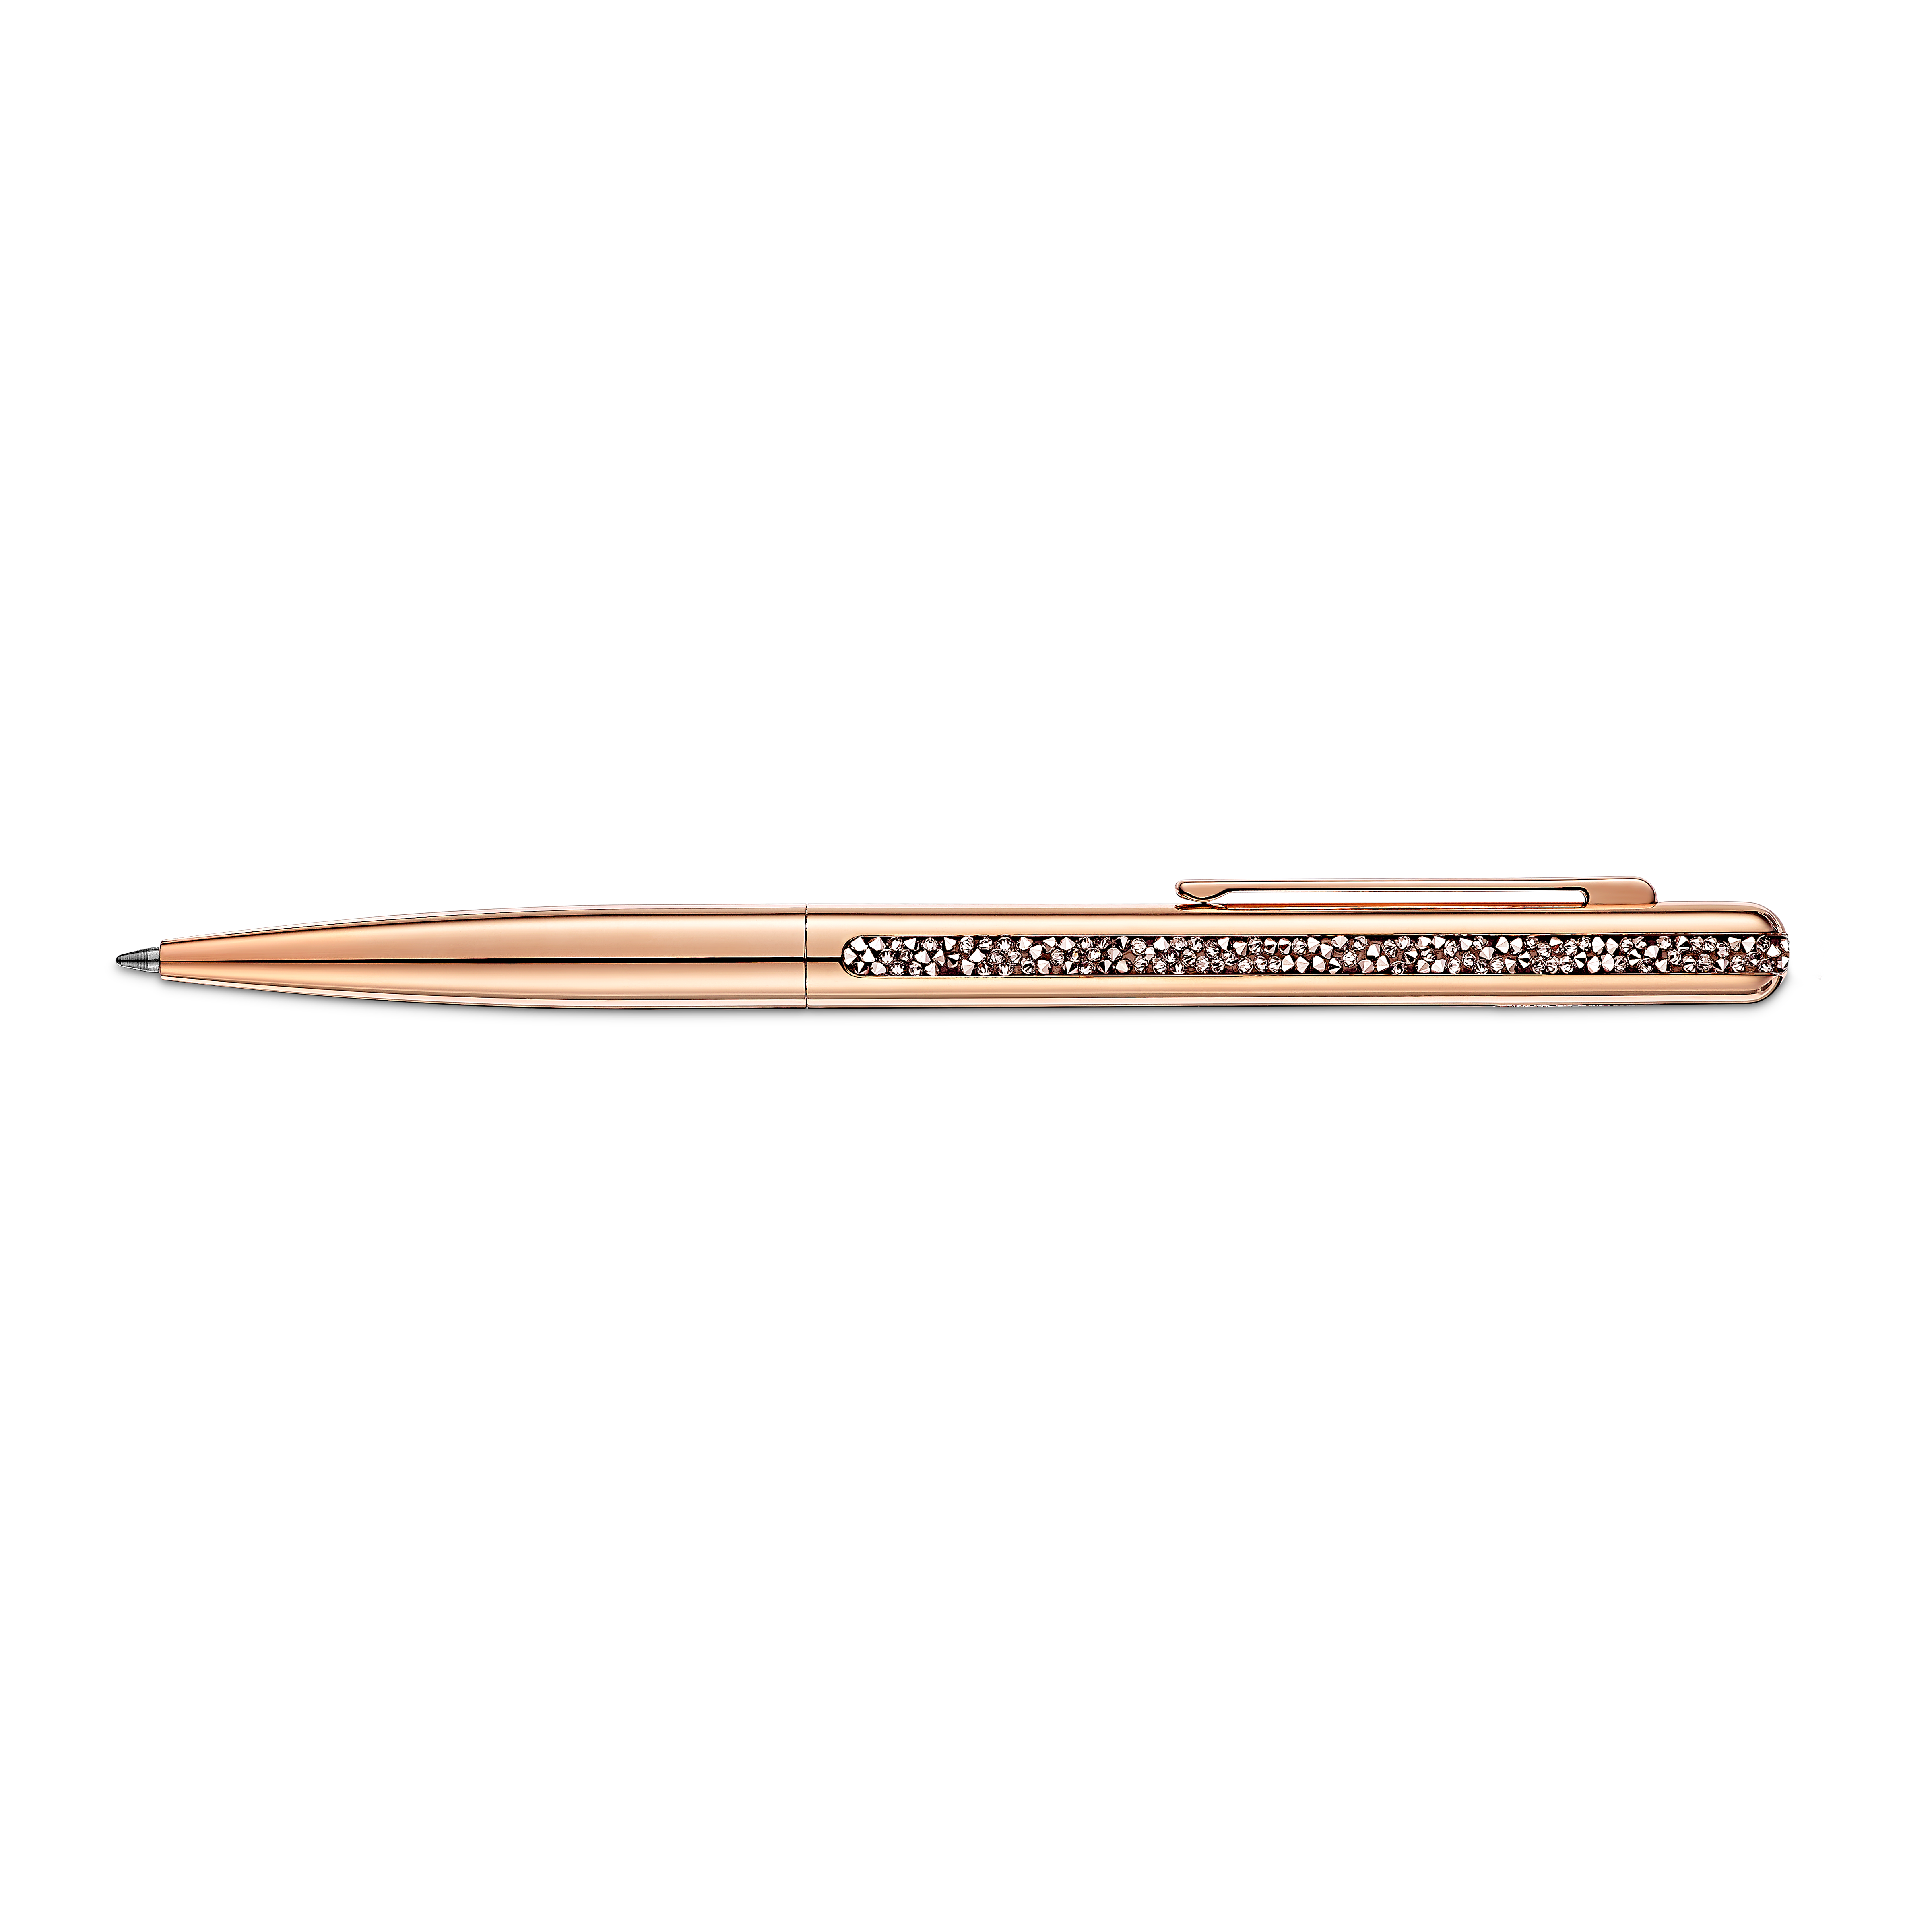 Crystal Shimmer ballpoint pen, Rose gold tone, Rose gold-tone plated by SWAROVSKI